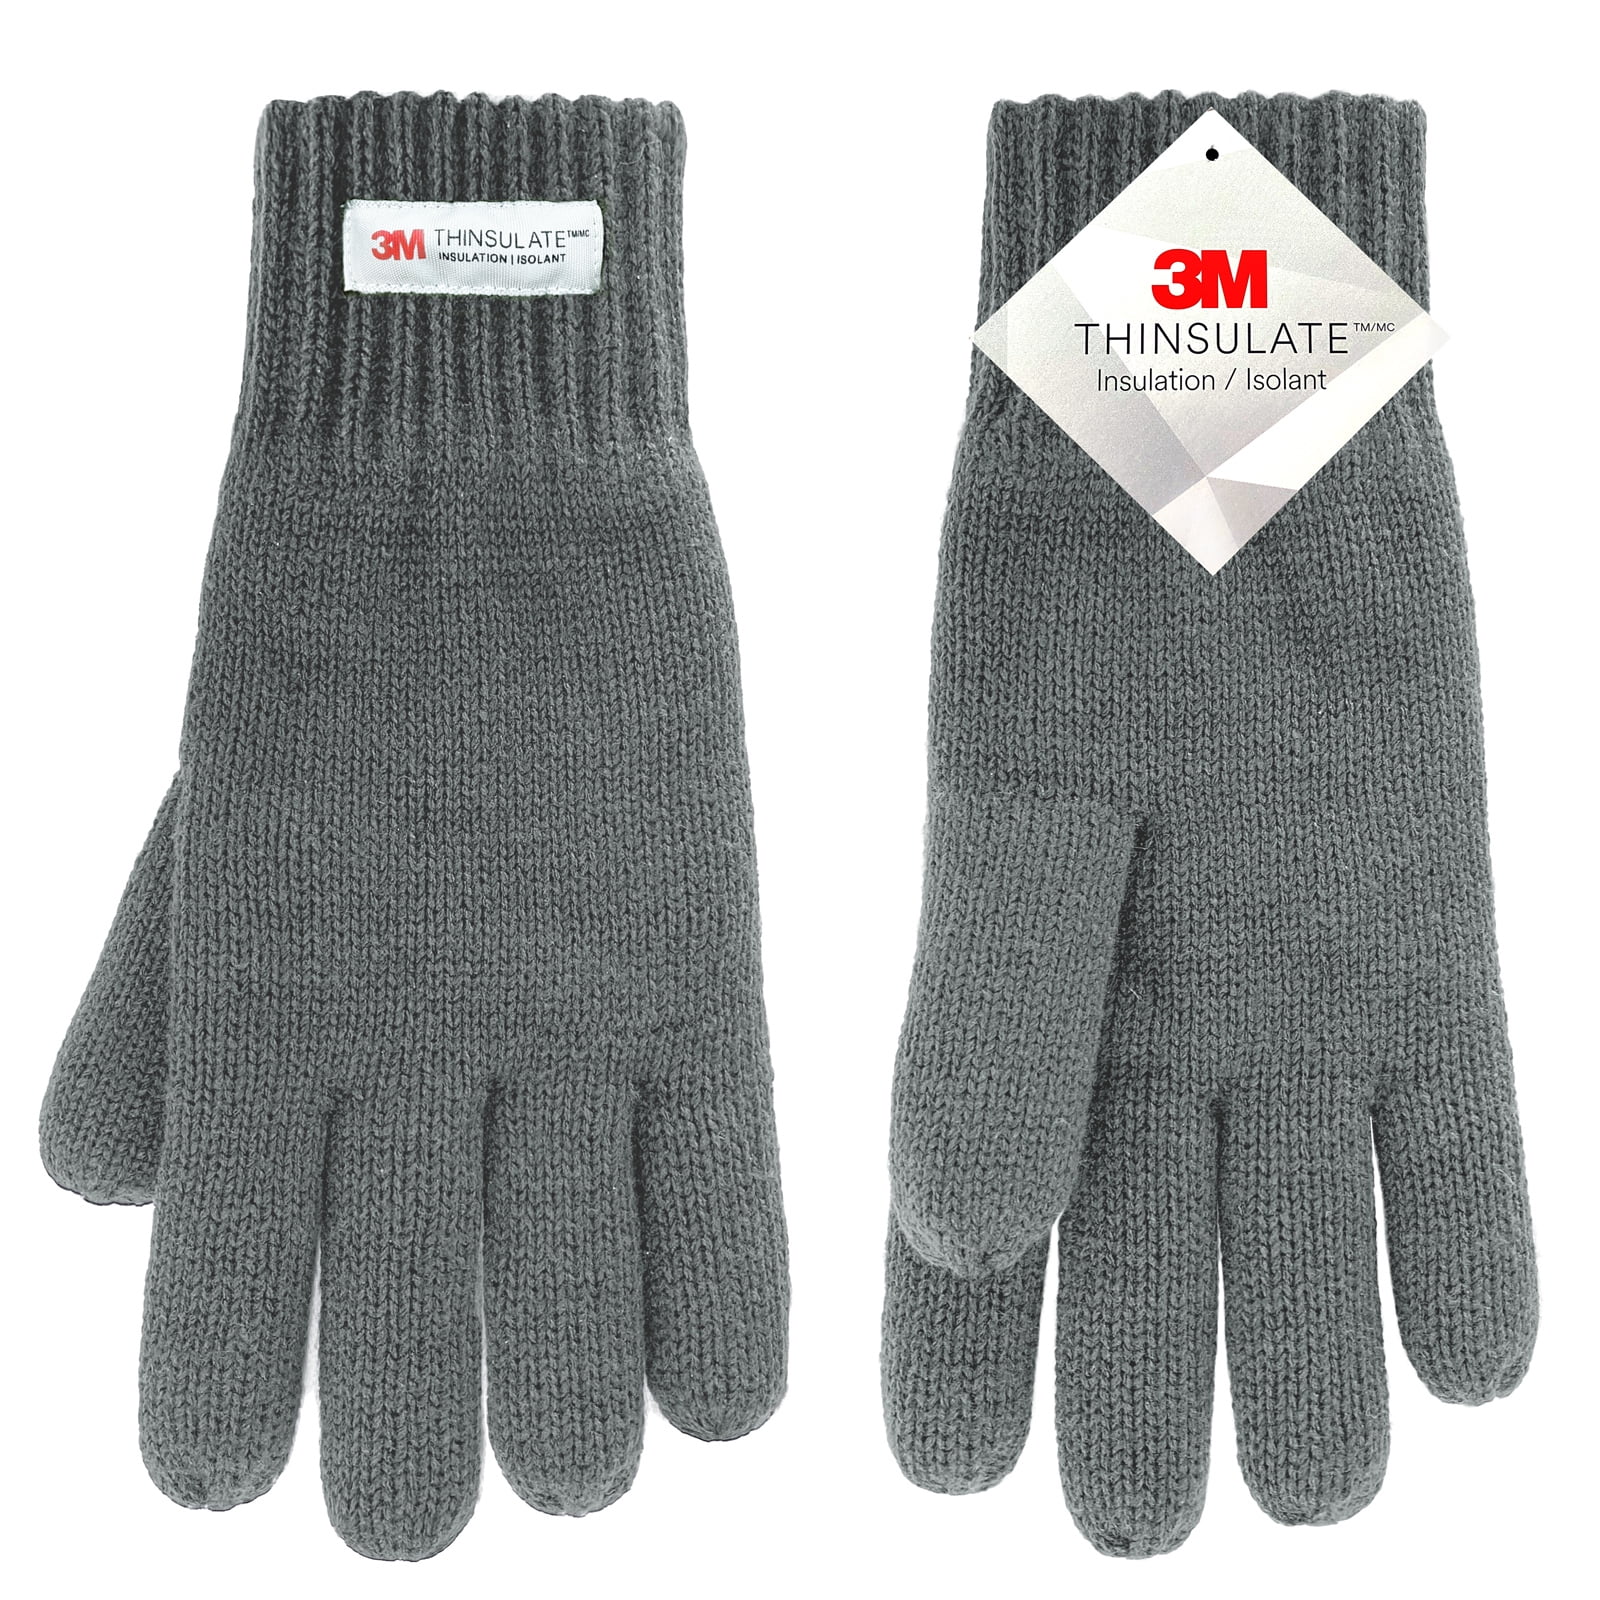 Men/Ladies Thermal Insulated Fleece Lined Warm Winter Gloves 